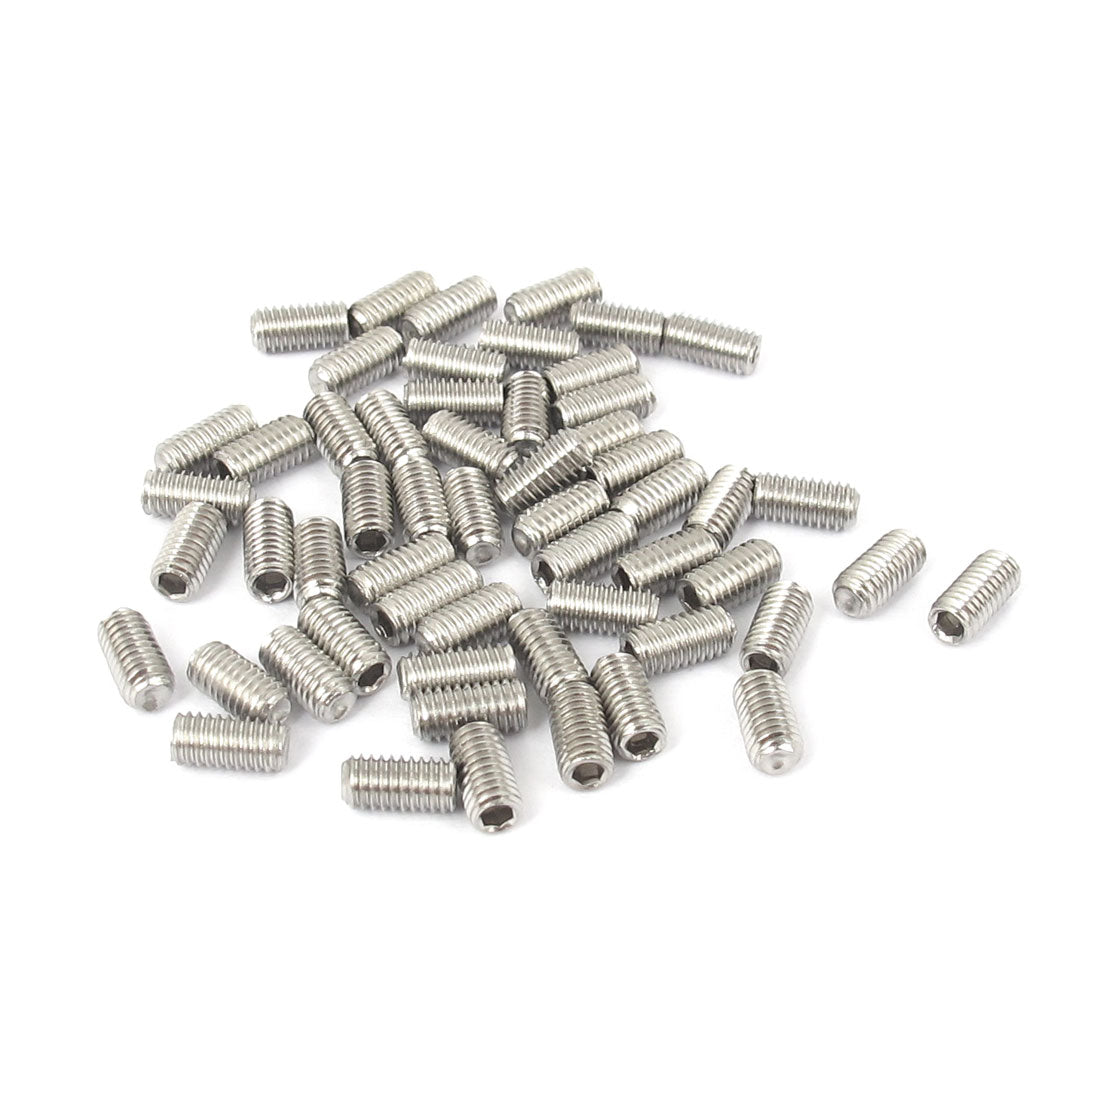 uxcell Uxcell M3x6mm Stainless Steel Hex Socket Set Cap Point Grub Screws Silver Tone 50pcs